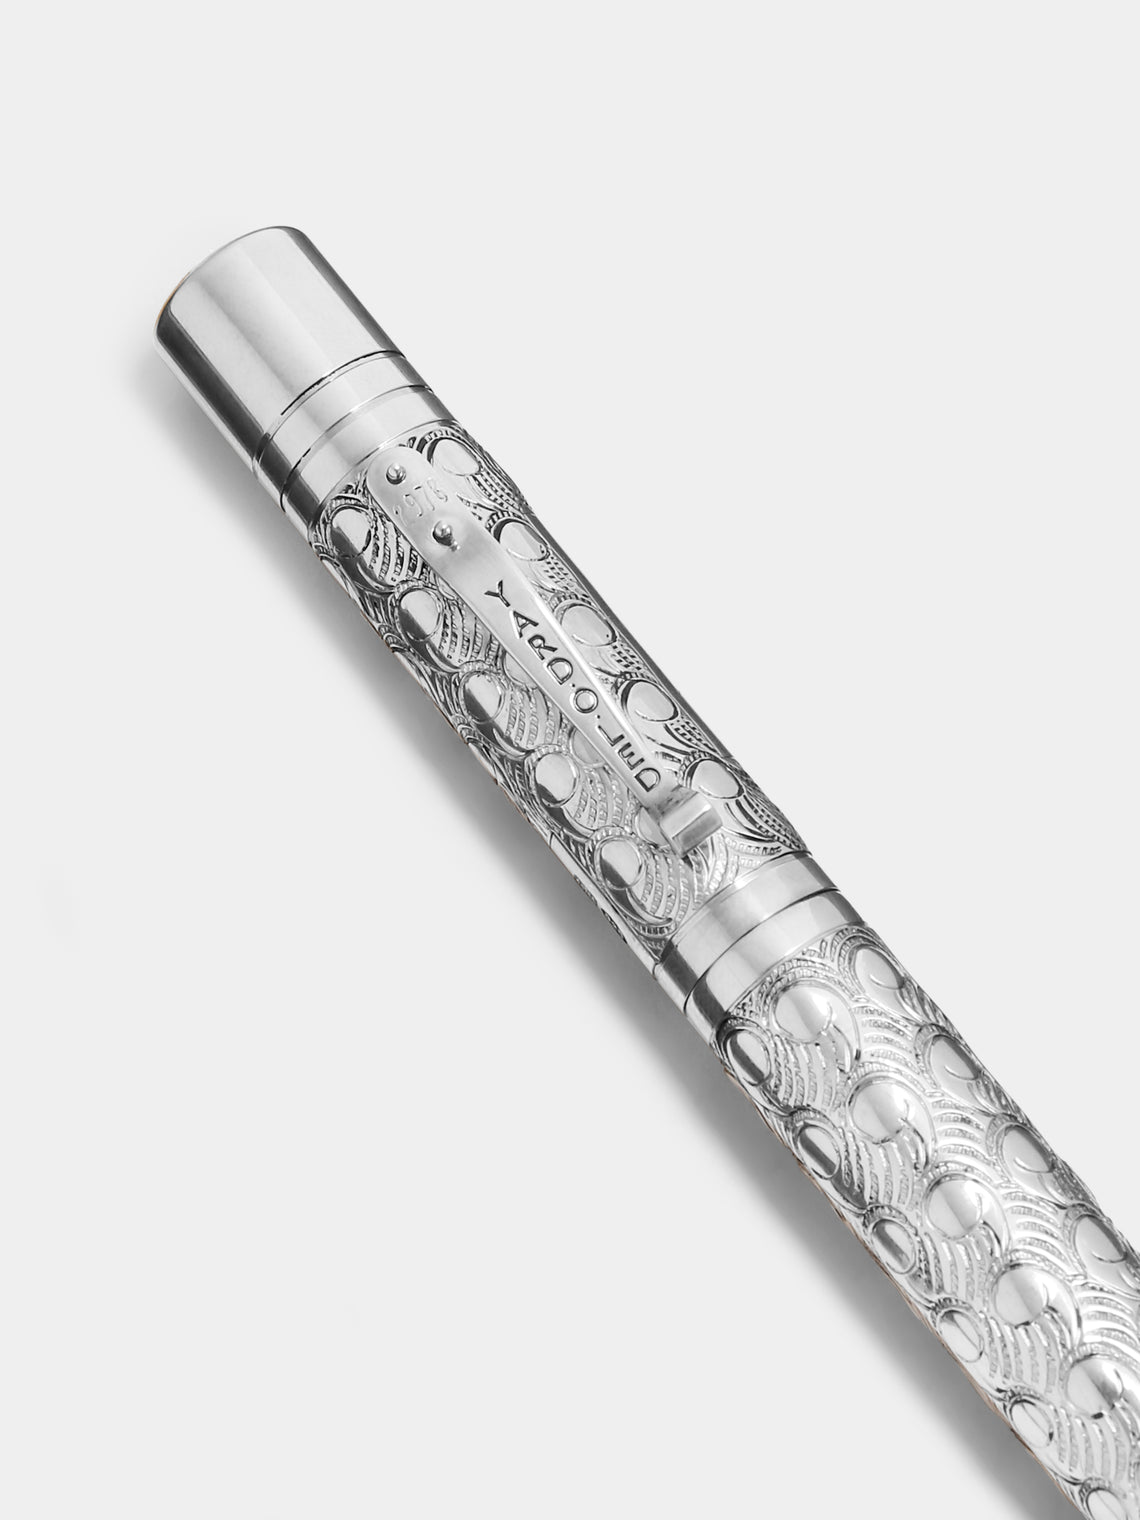 Yard O Led - Viceroy Grand Victorian Sterling Silver Fountain Pen - Silver - ABASK